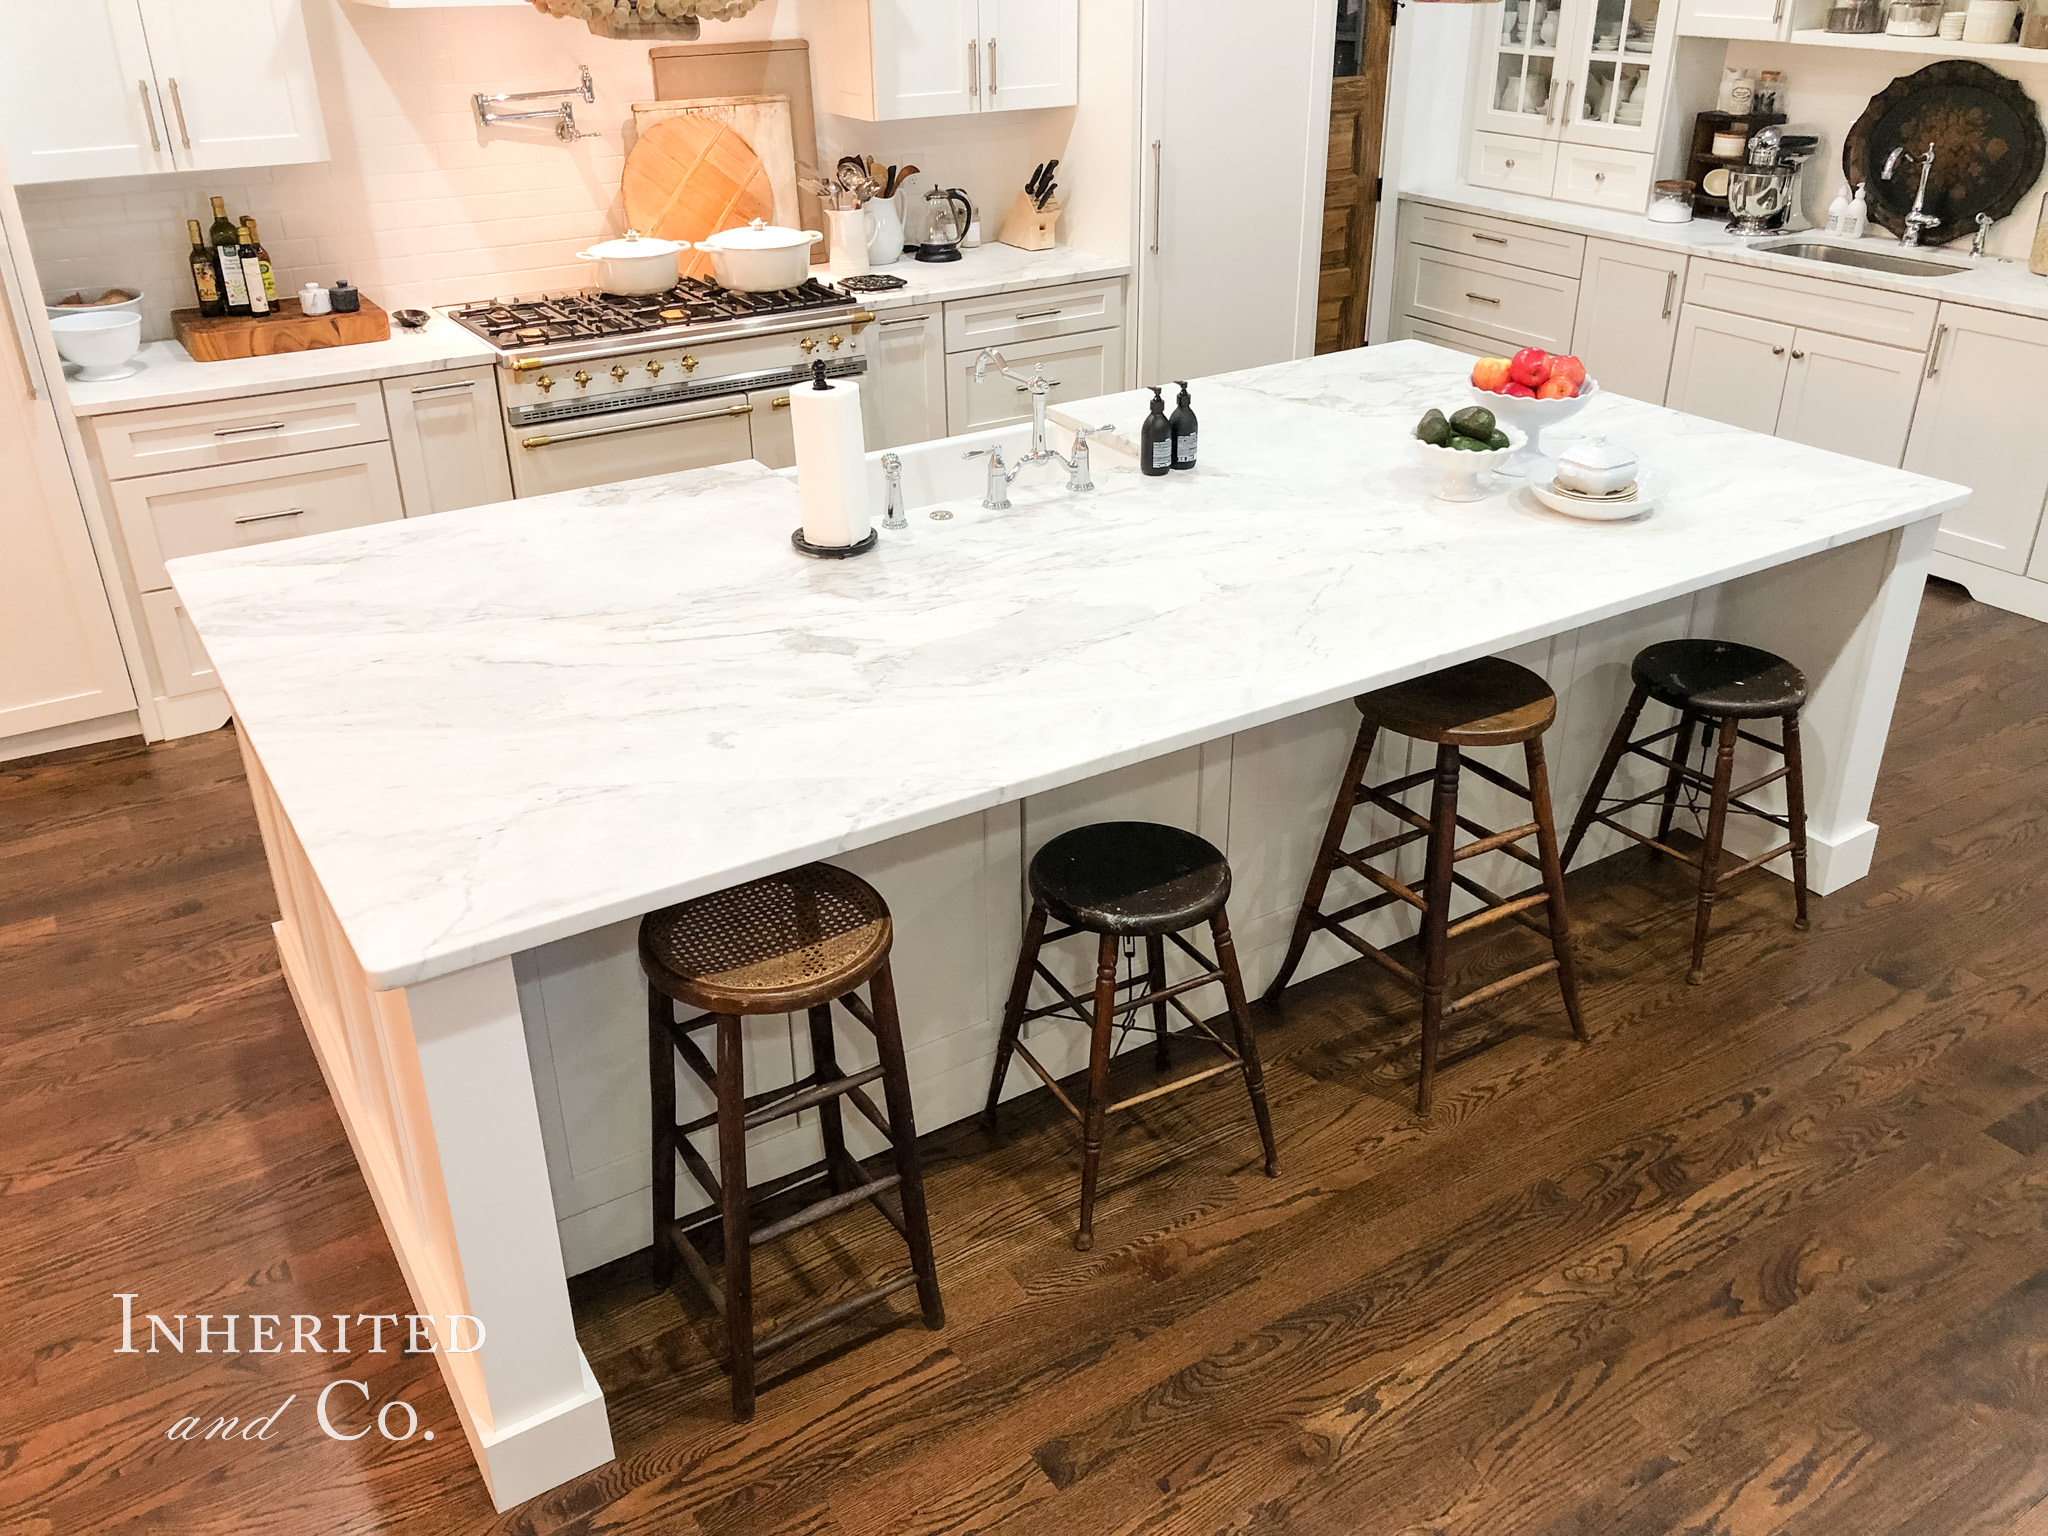 Marble-topped kitchen island with antique stools